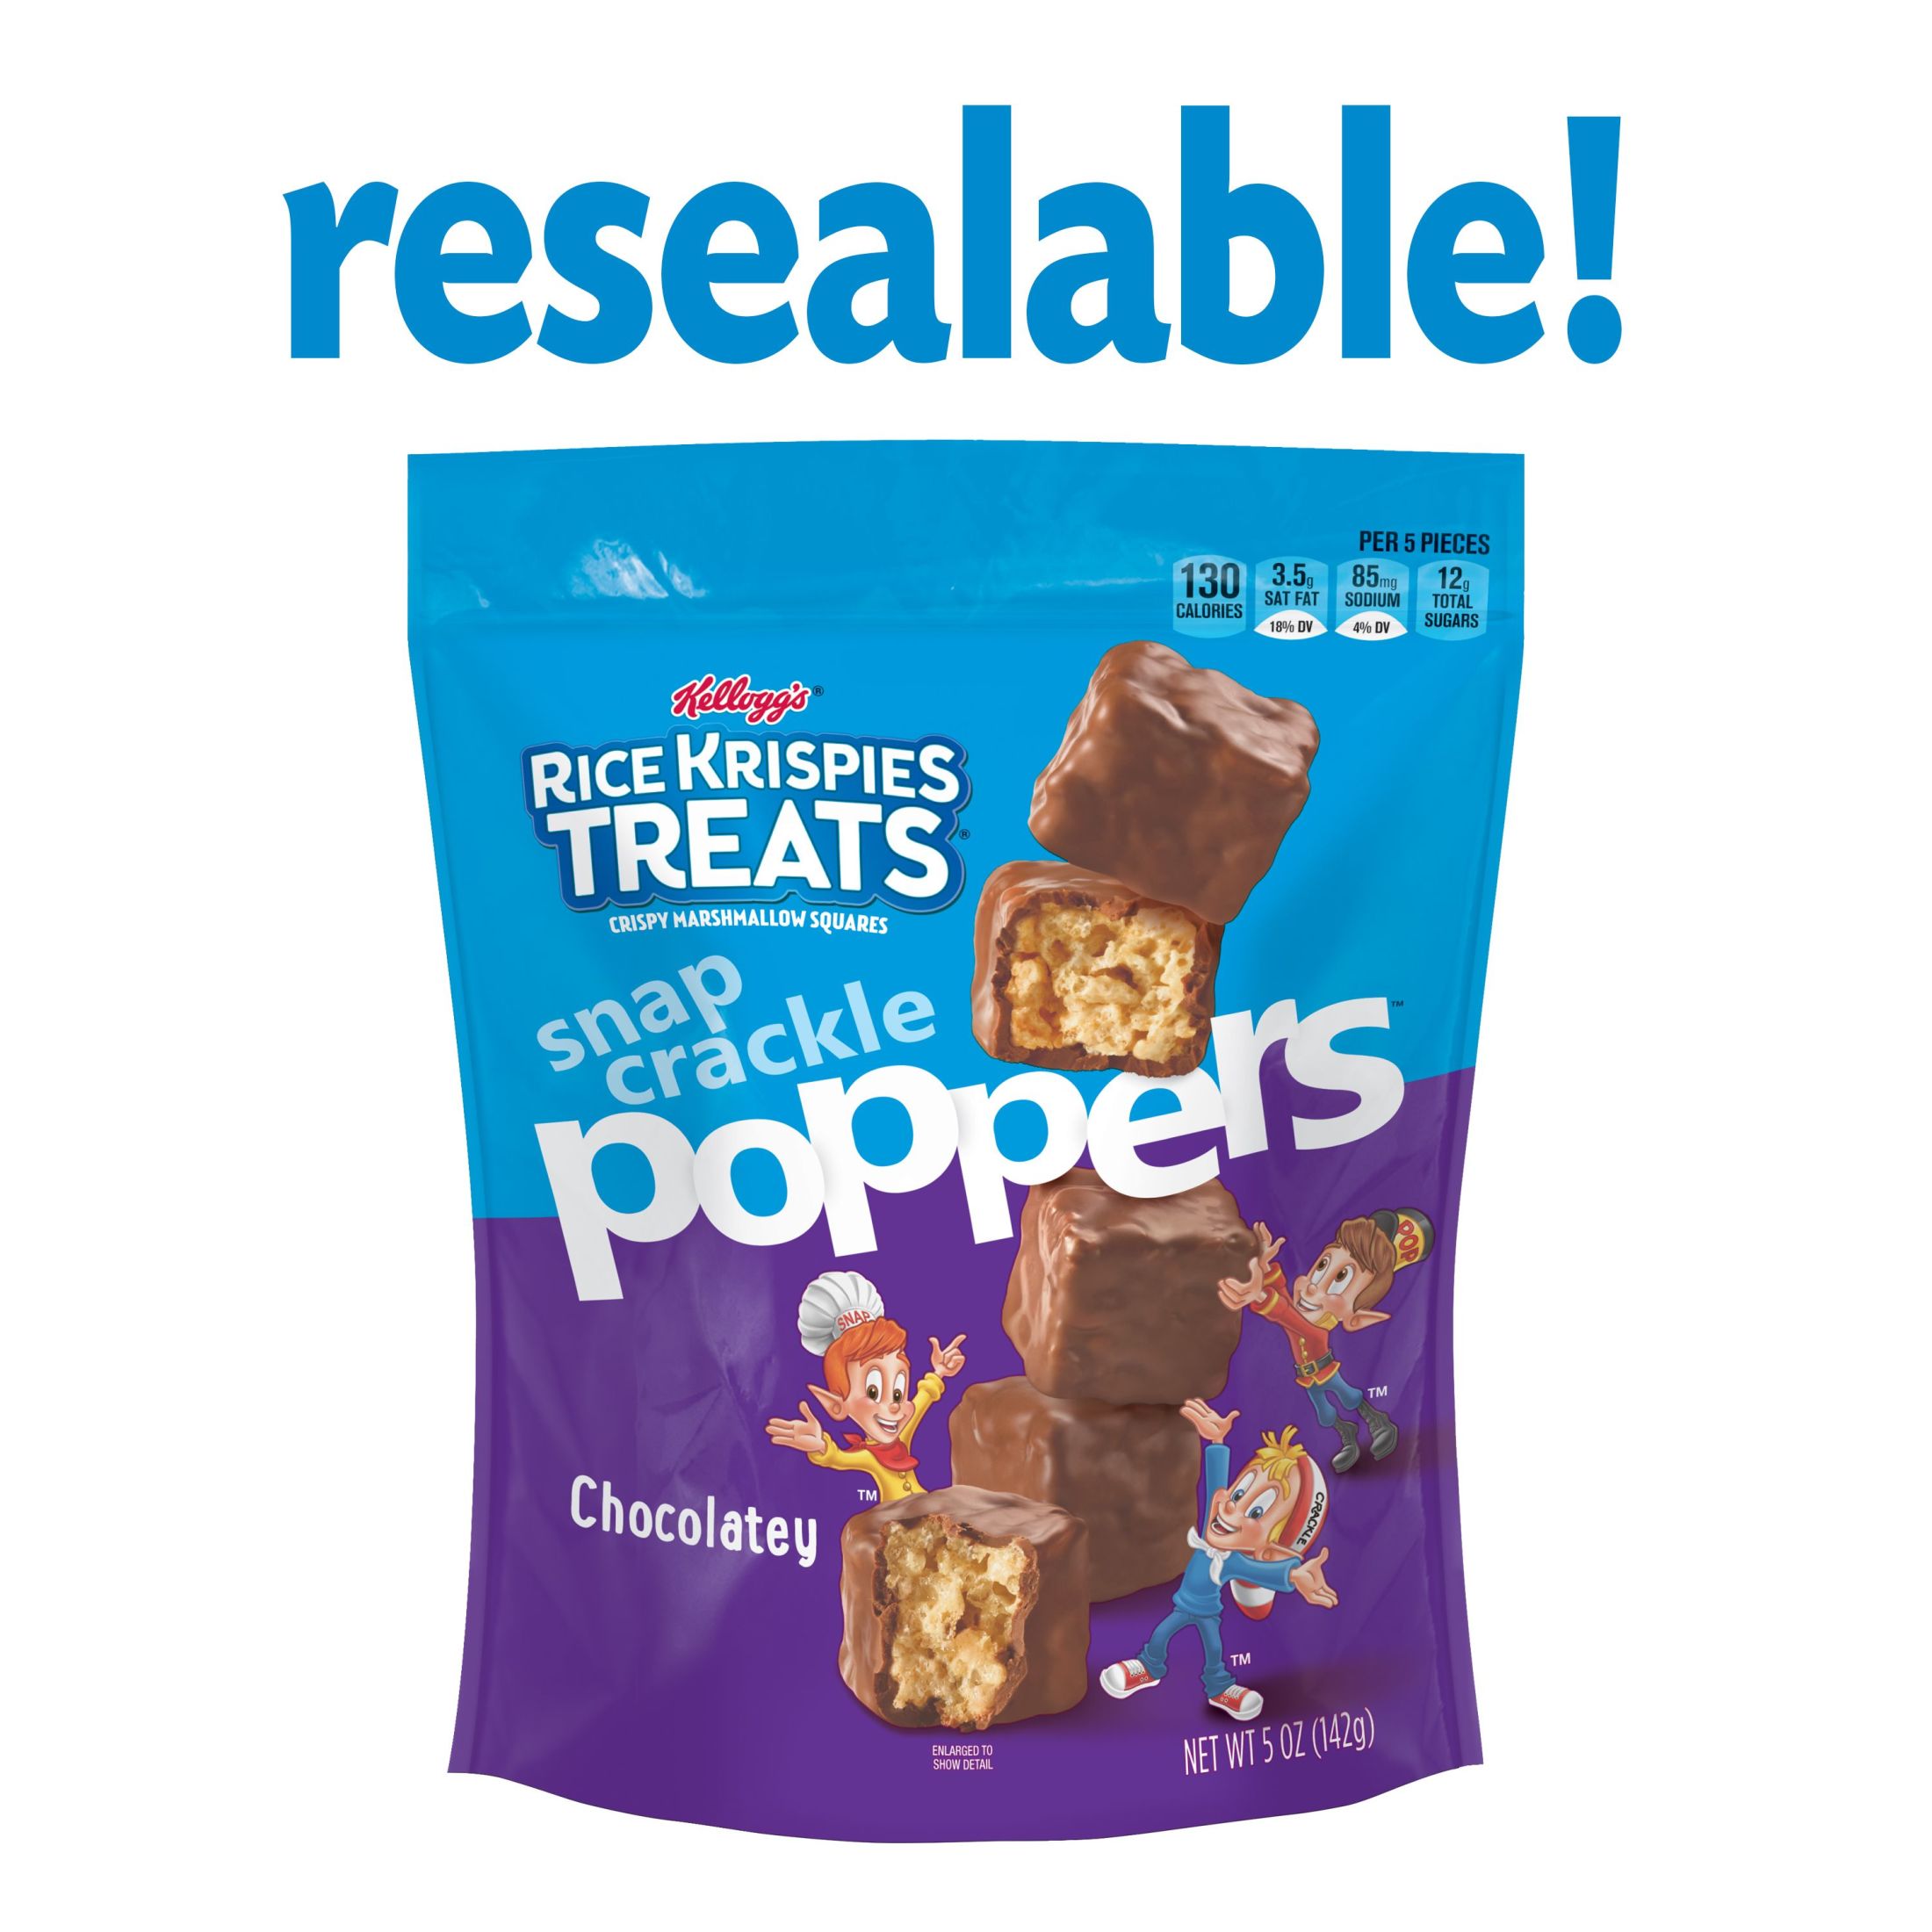 Rice Krispies Treats Poppers Chocolatey Chewy Crispy Marshmallow Squares, 7.1 oz - image 5 of 8